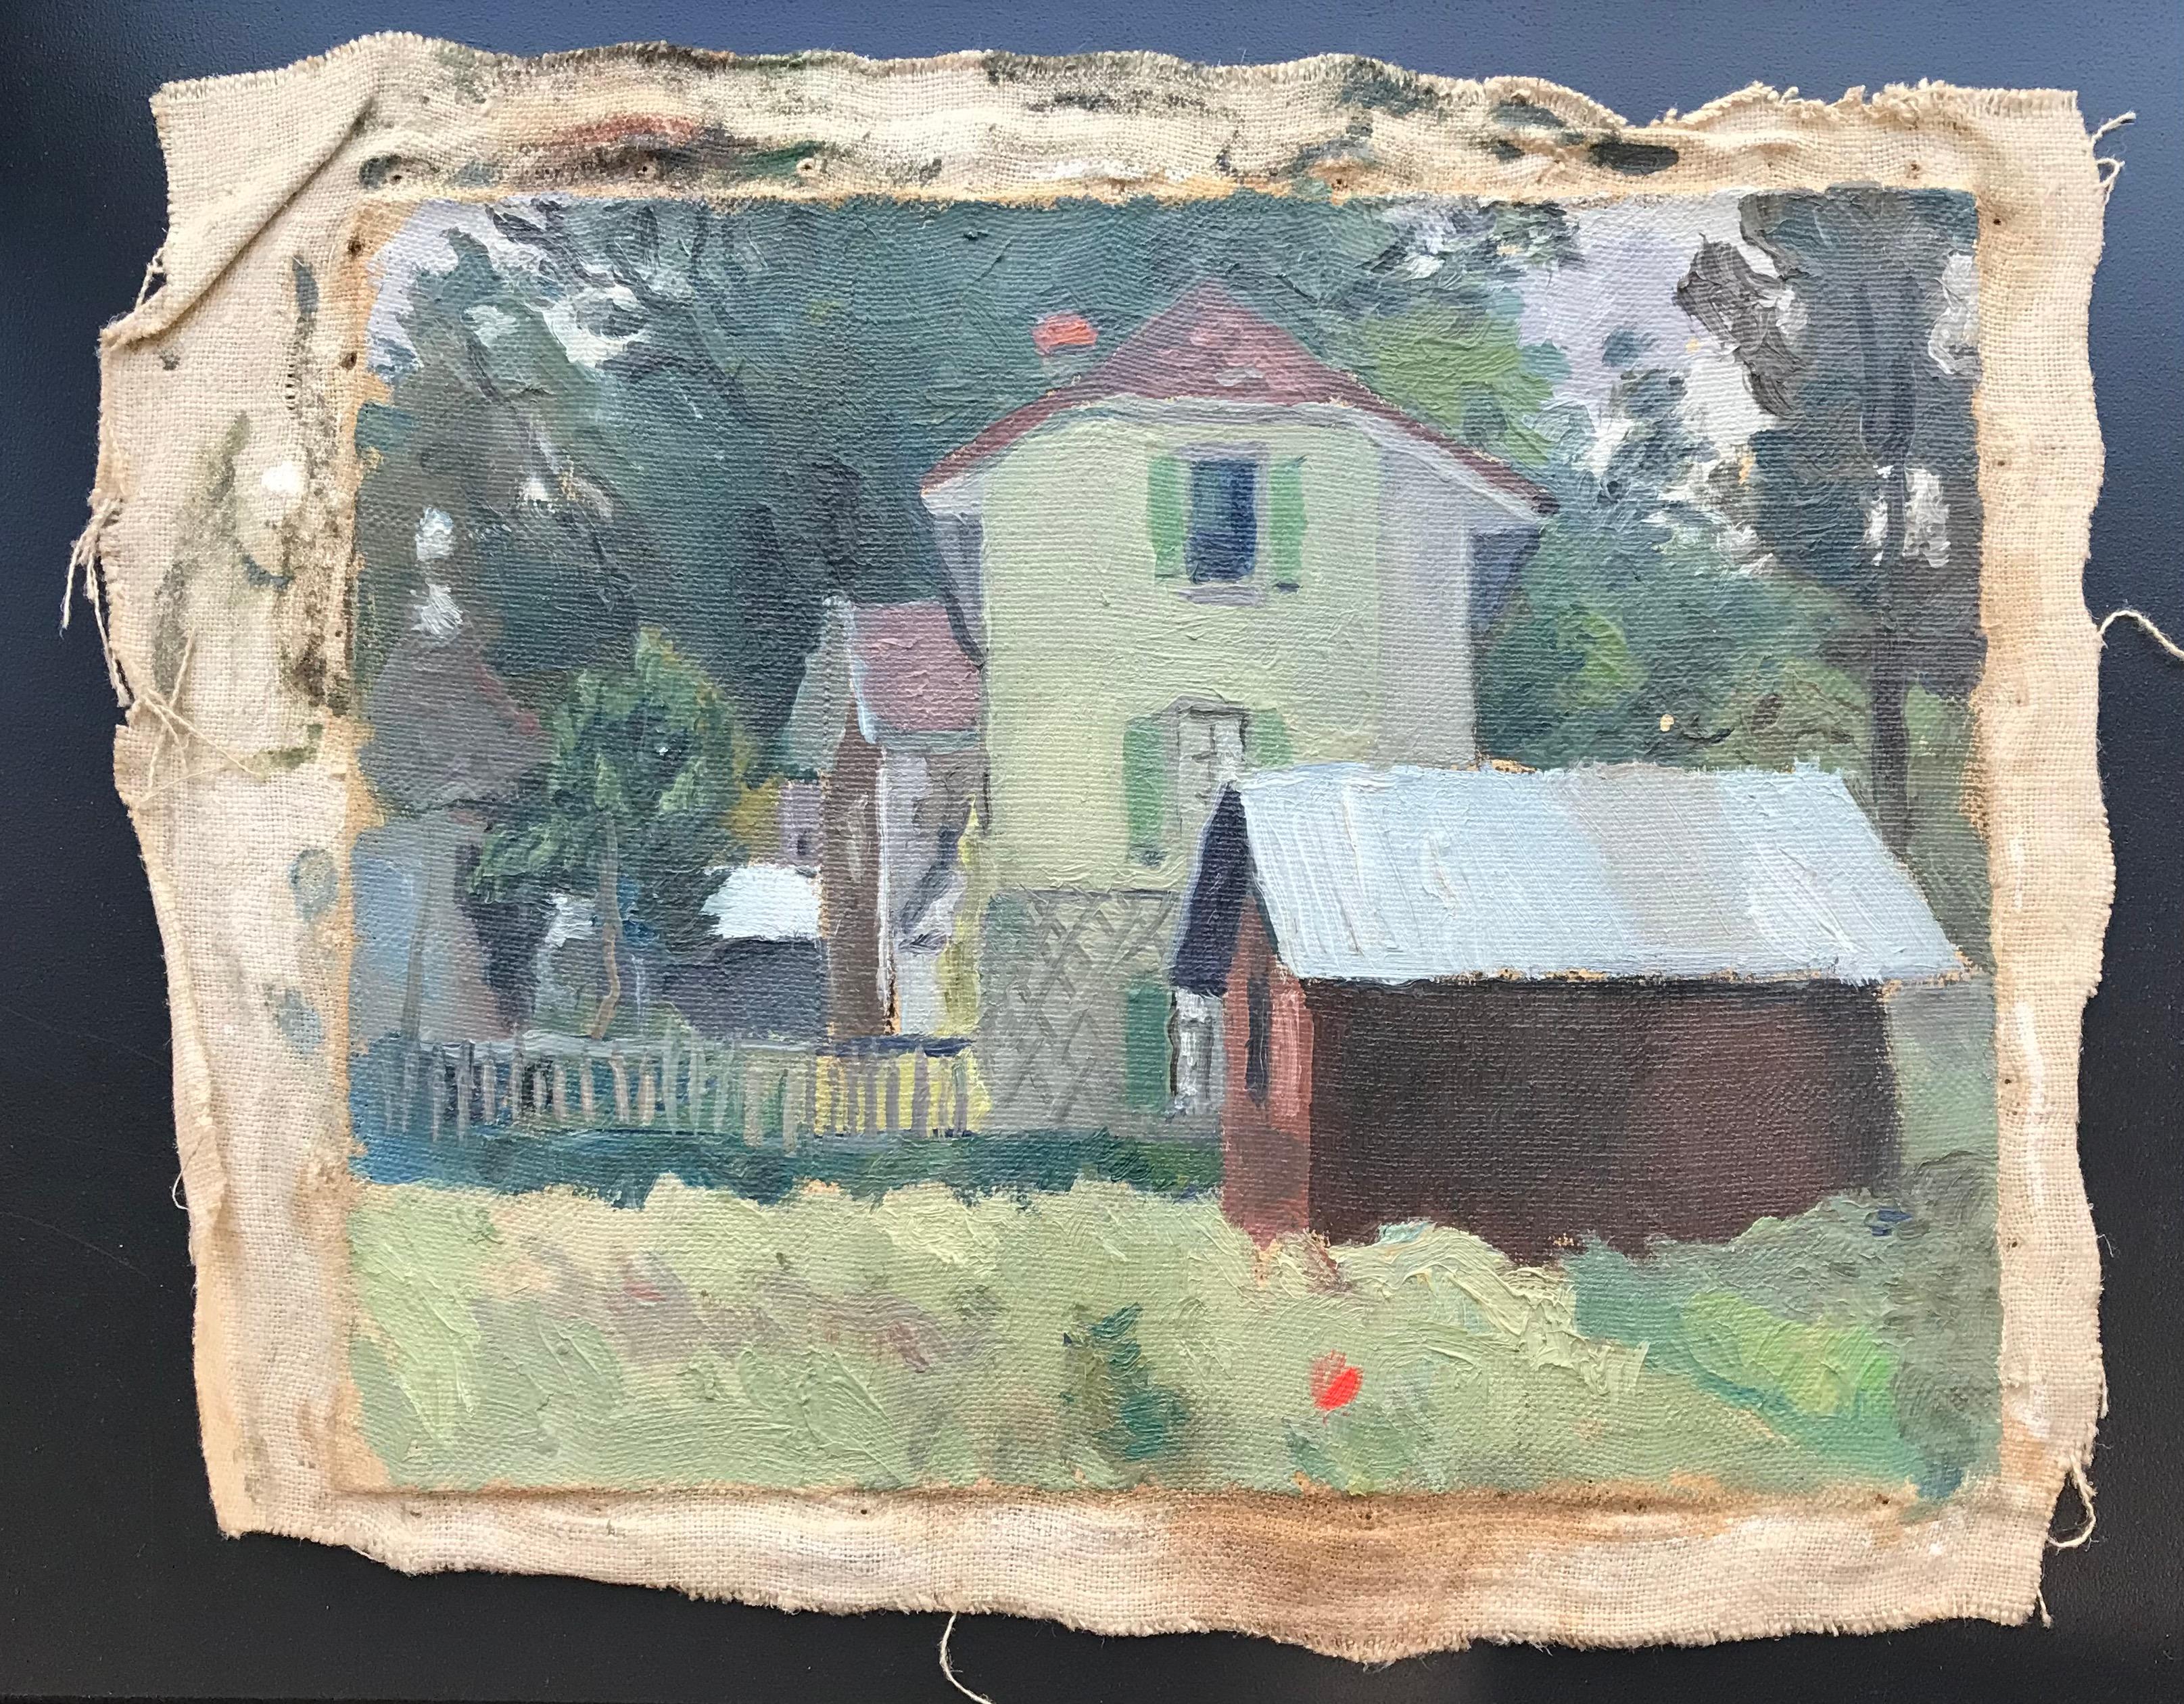 Villa by I. Ch. Goetz - Oil on canvas 41x32 cm - Painting by Isaac Charles Goetz